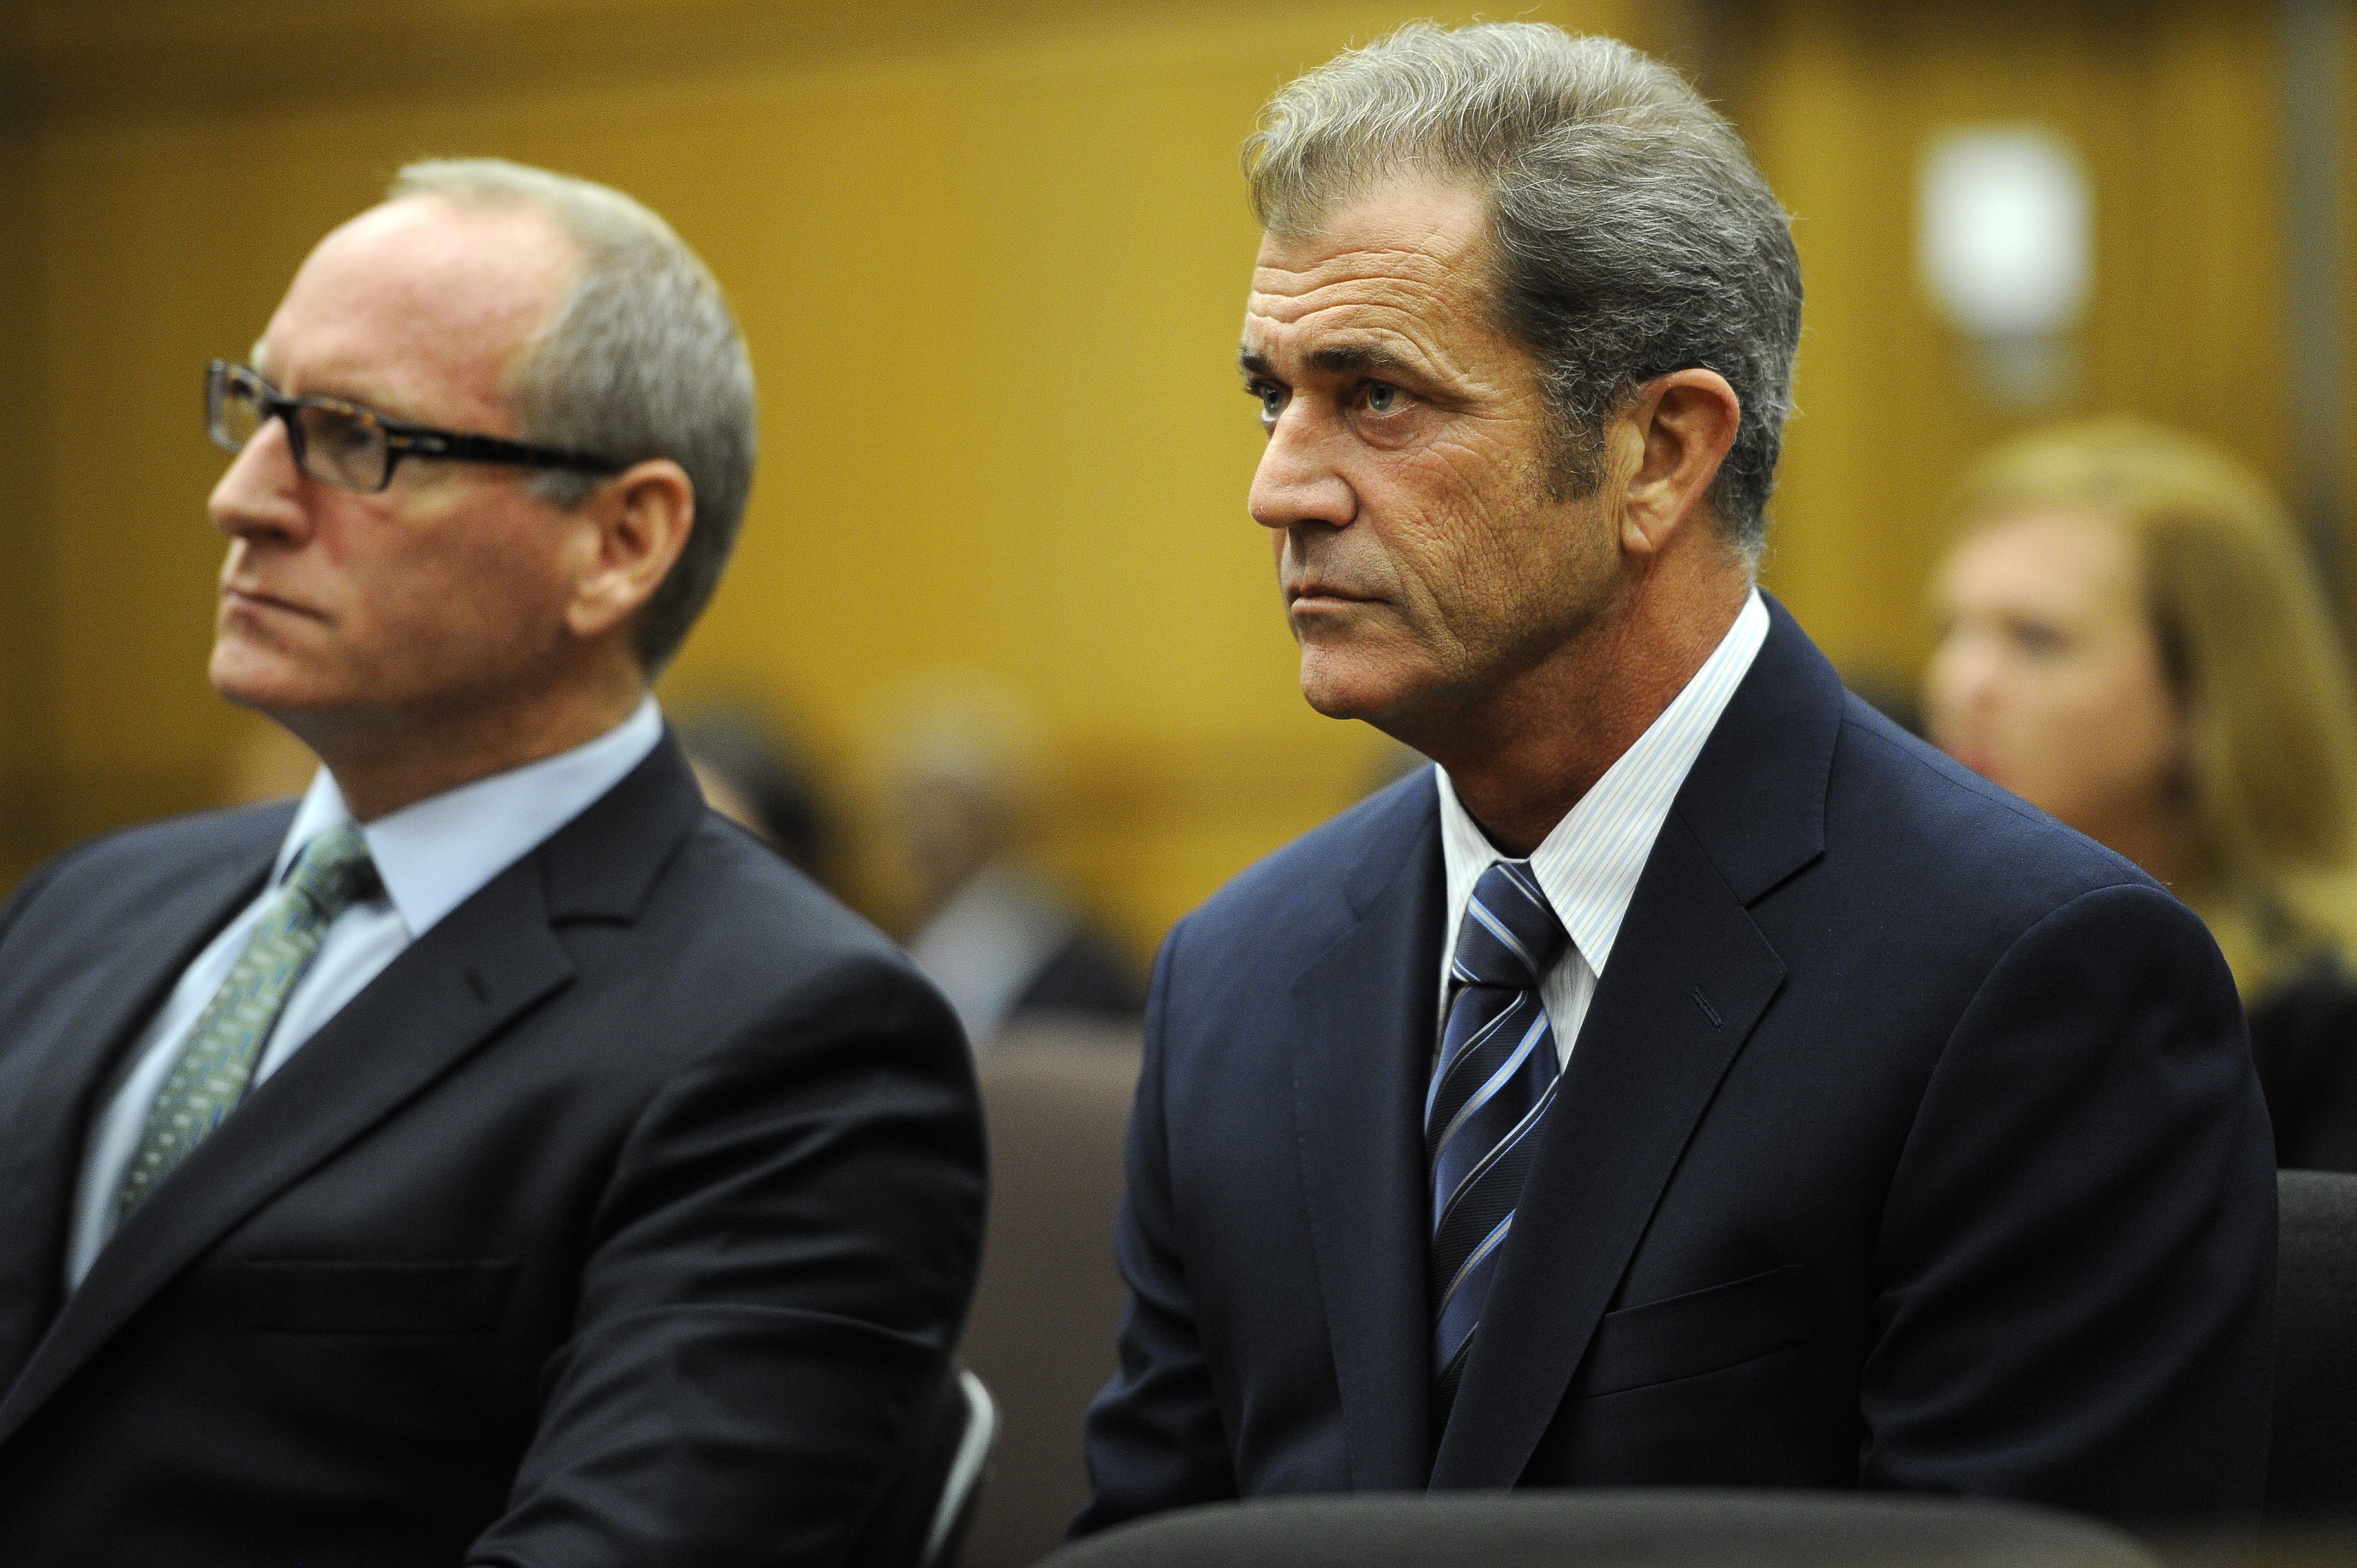 Academy Award-winning actor/director Mel Gibson (R) appears with his lawyer Larry Ginsberg (L) at the Los Angeles Superior Court on August 31, 2011, in downtown Los Angeles. | Source: Getty Images